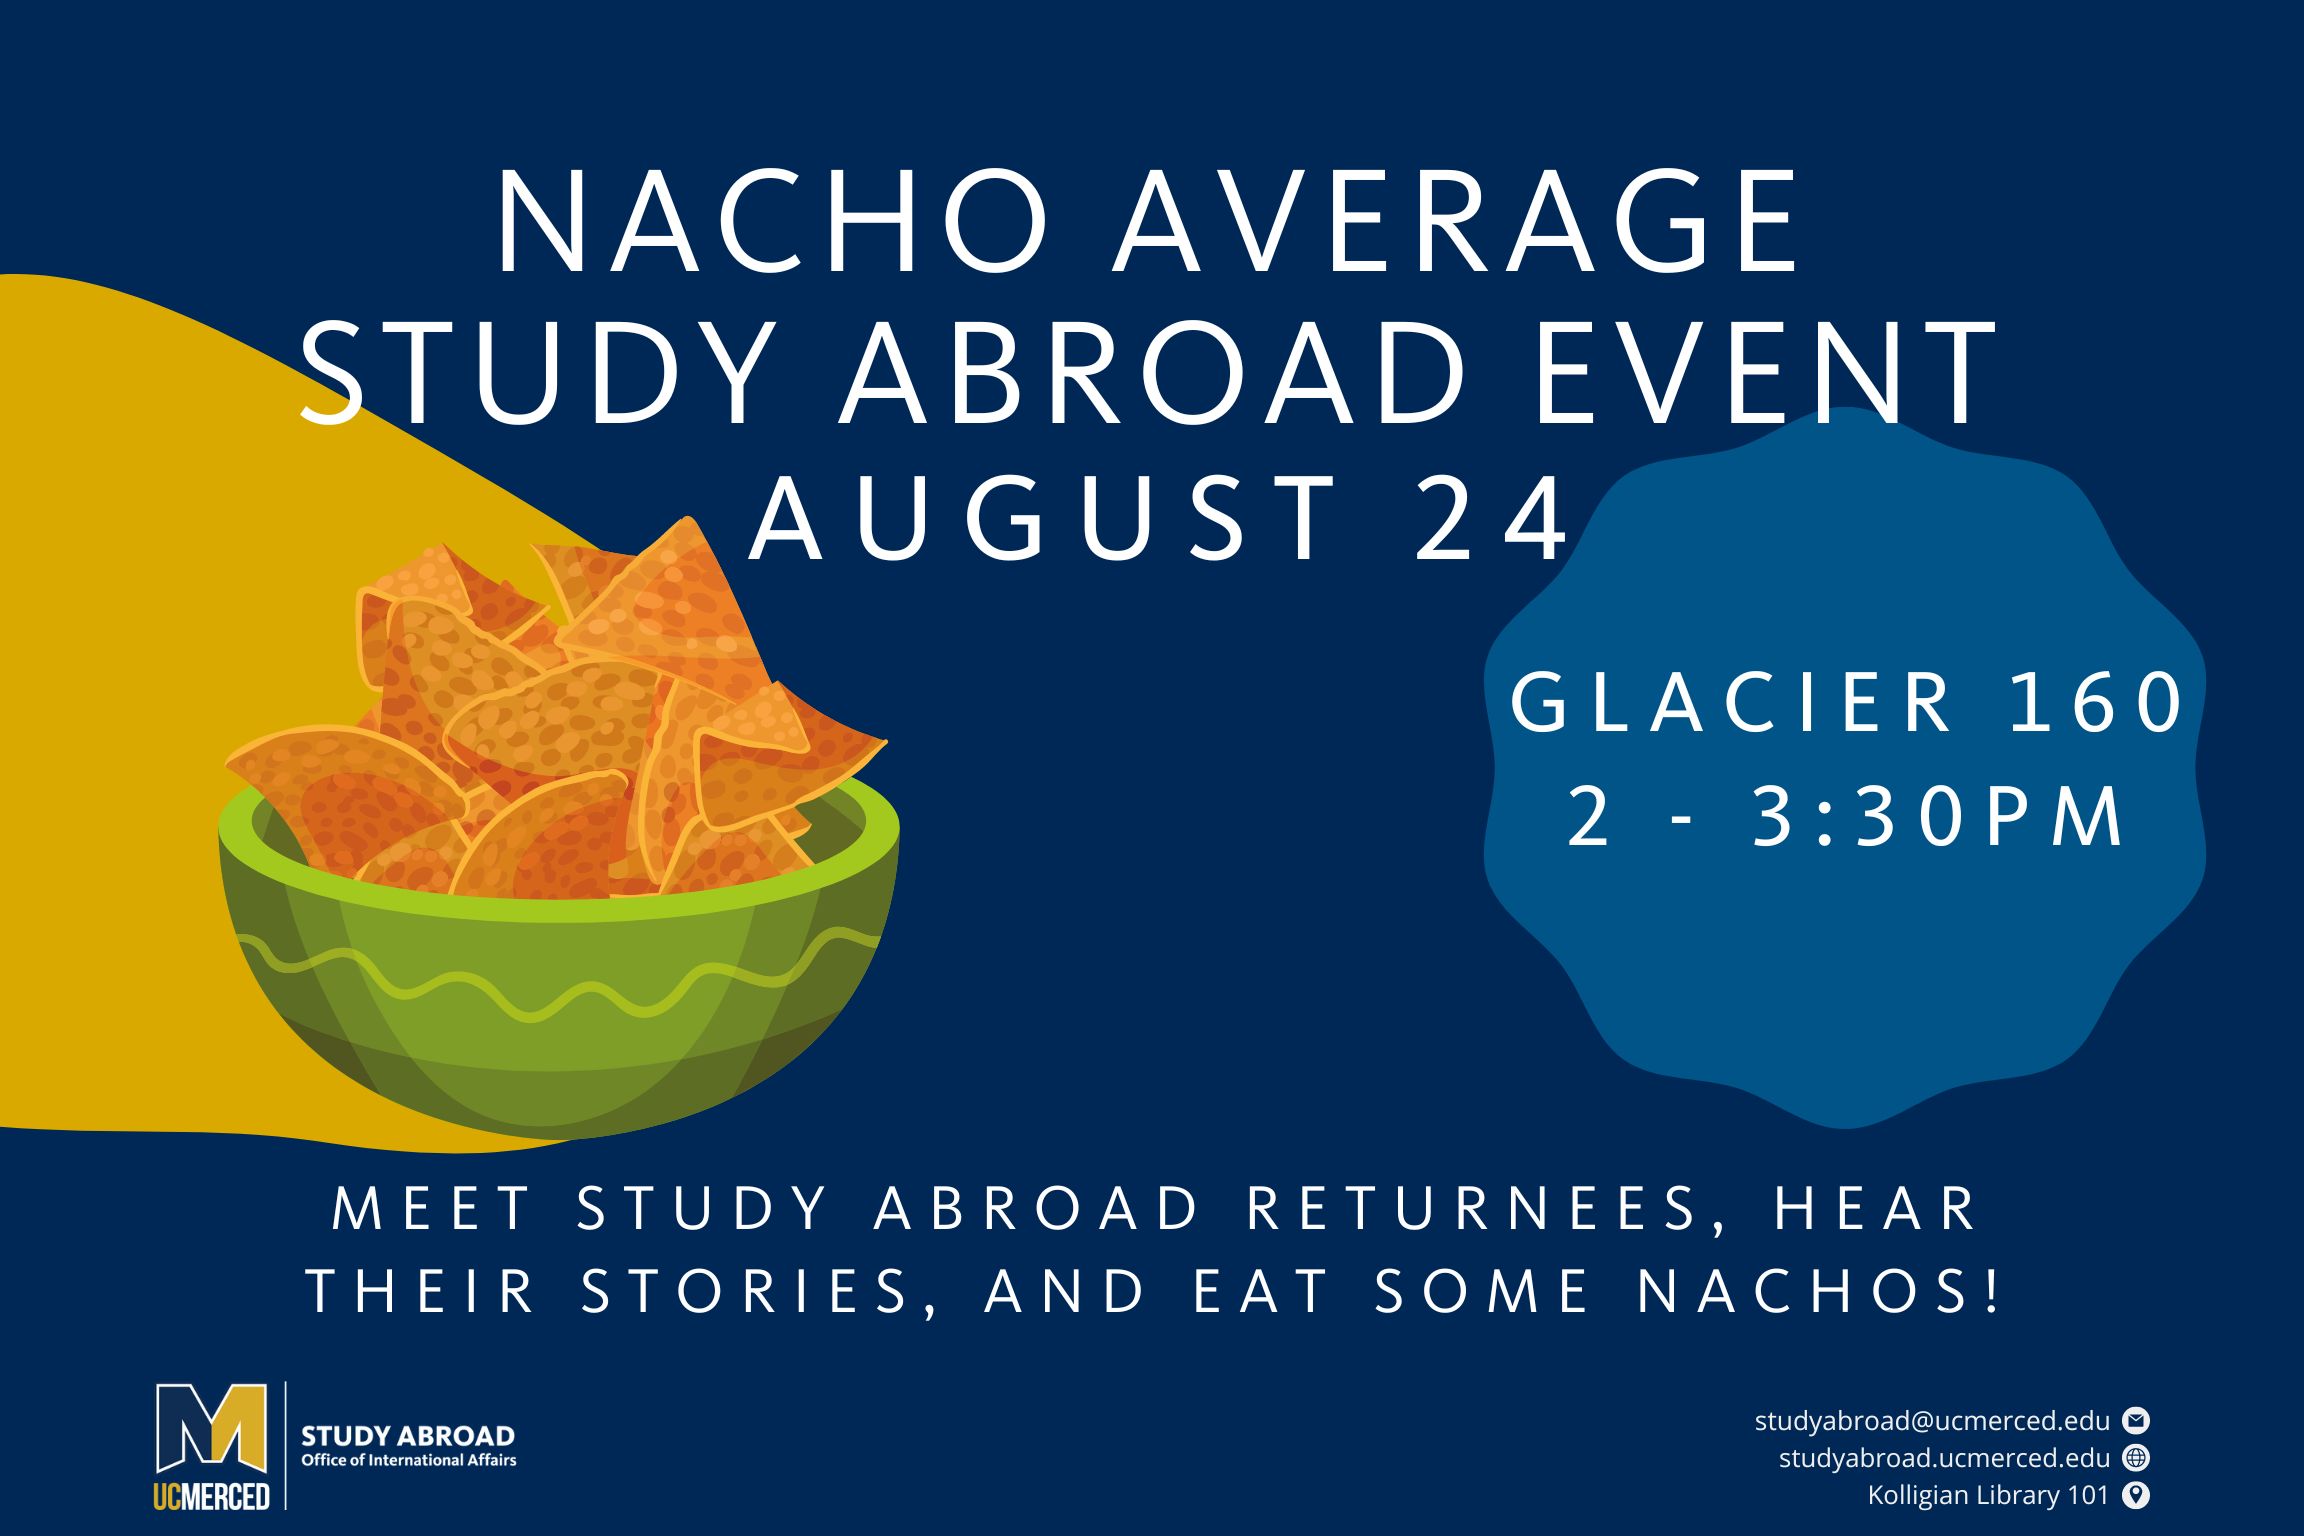 Nacho Average Study Abroad Event flyer with August 24 date and Glacier Point 160 location